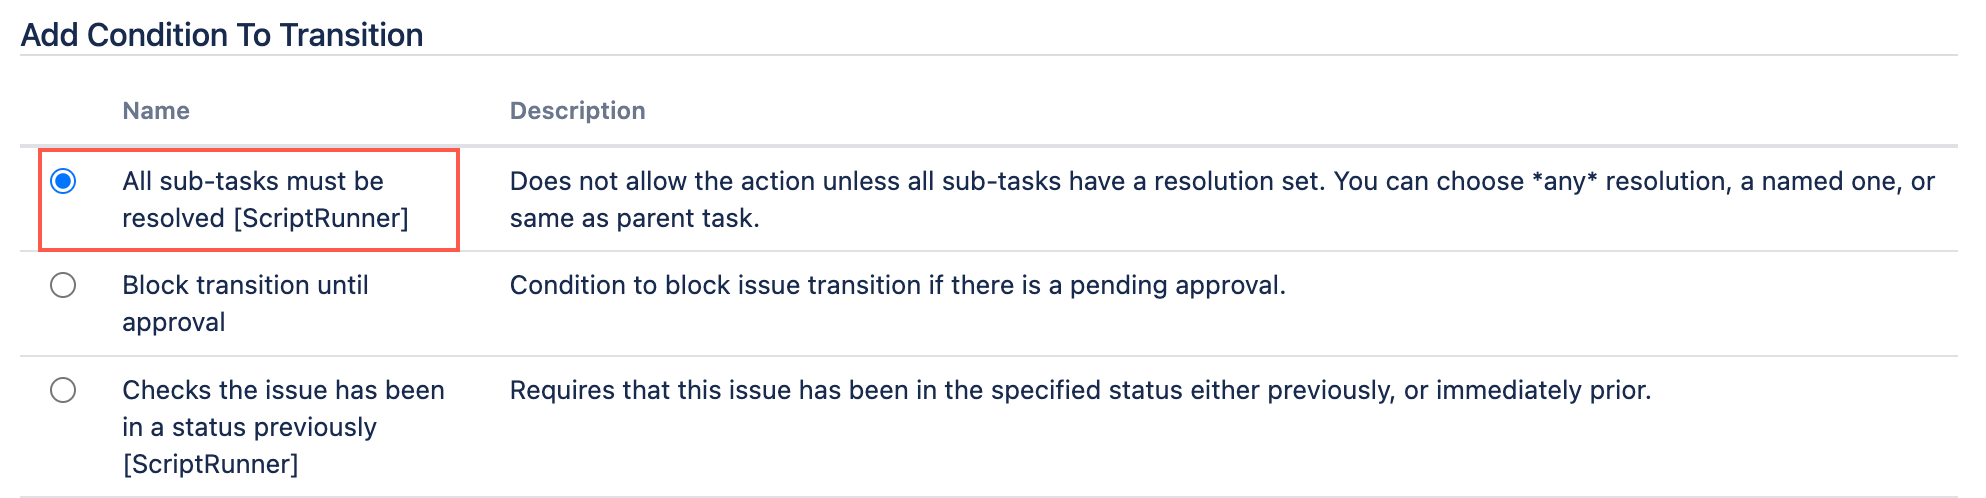 Image showing All sub-tasks must be resolved selected